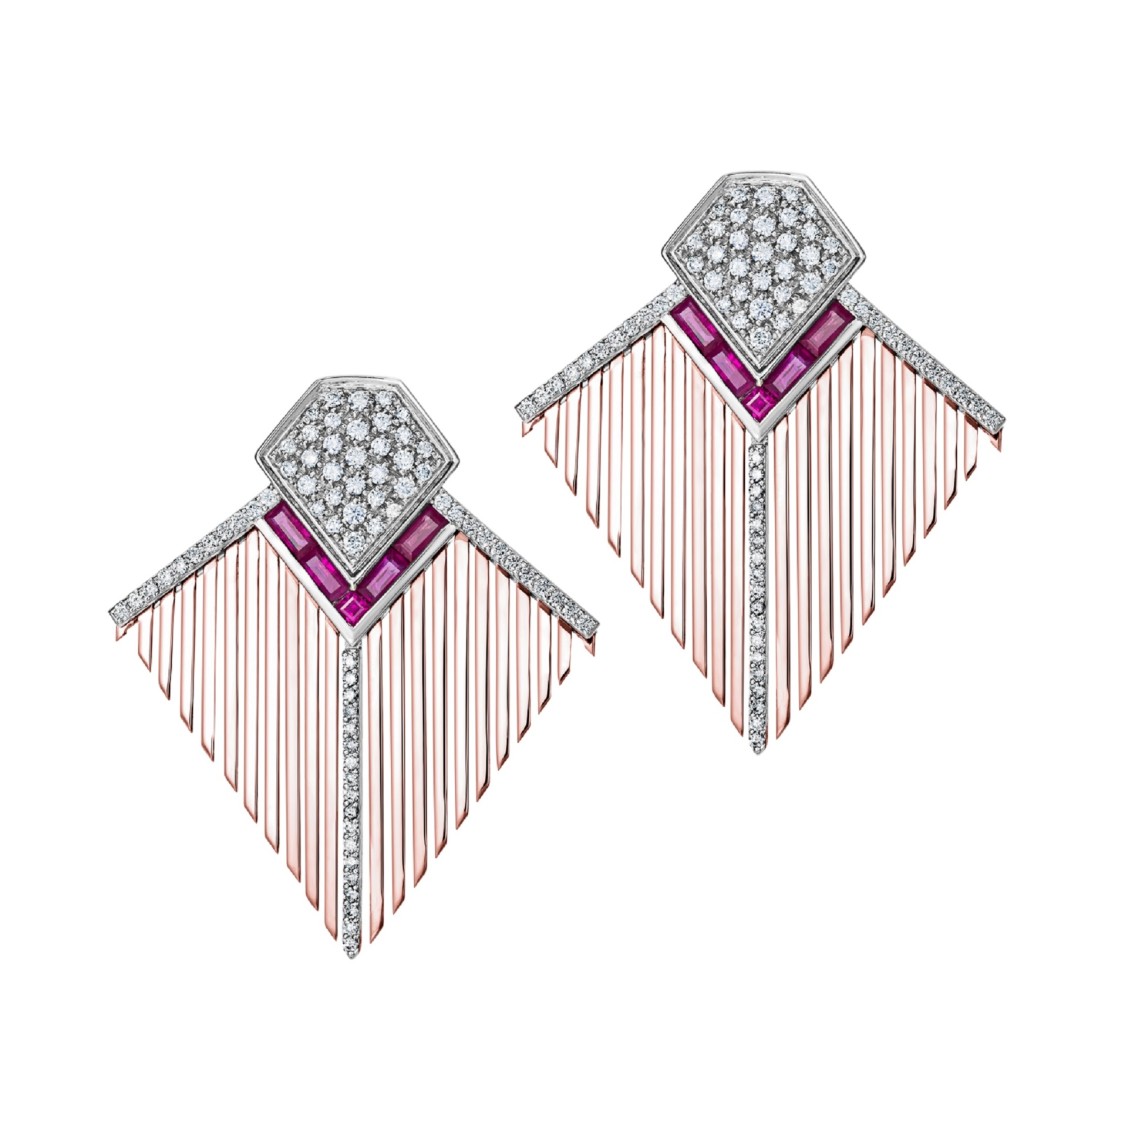 White And Rose Gold Earrings With Diamonds And Rubies